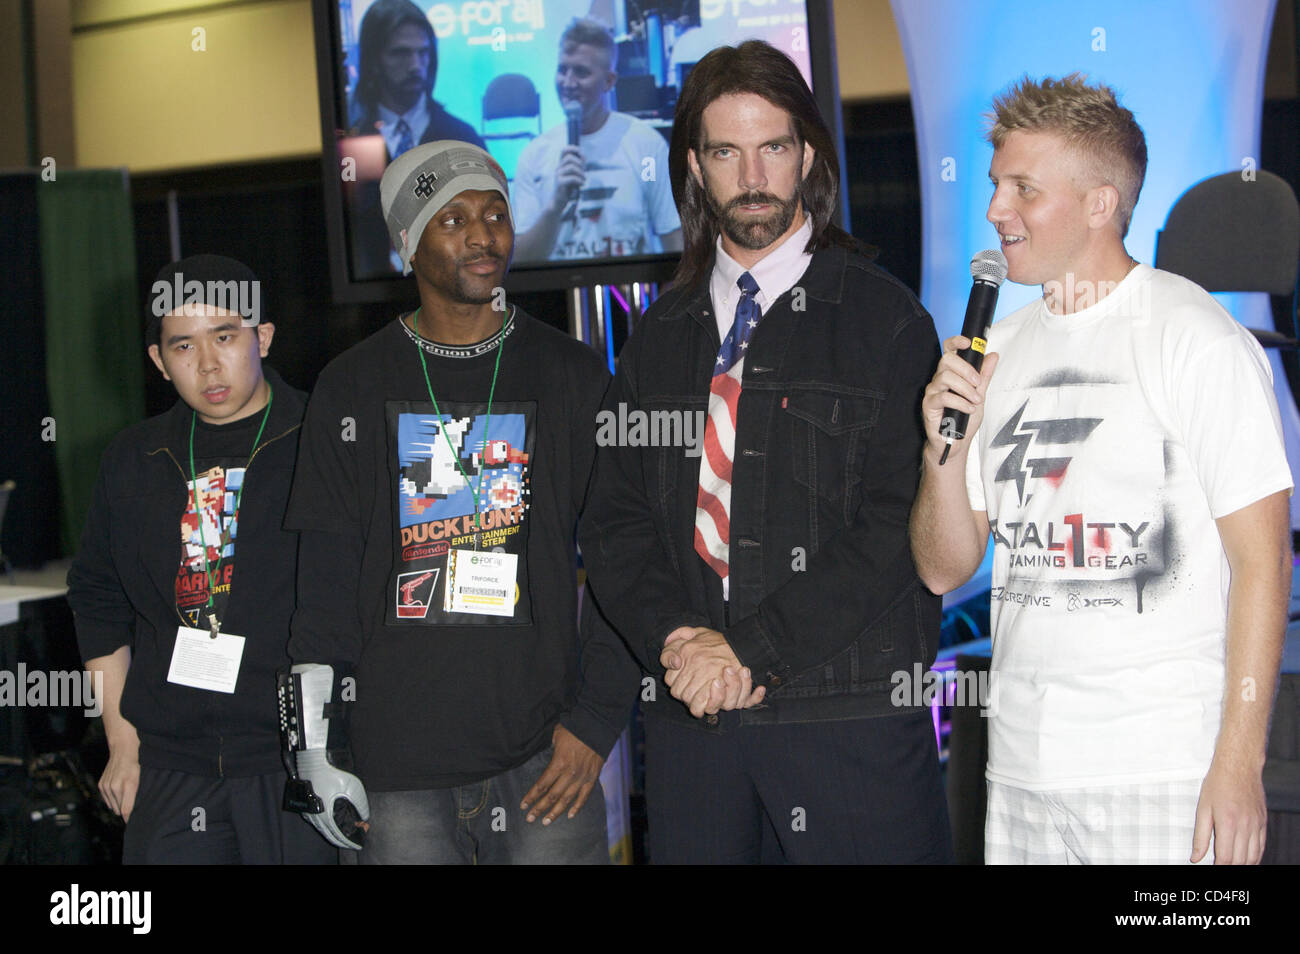 Group shot of the top gamers in the world at the 'E for All' Gamer Expo held at the Los Angeles Convention Center.  Justin Wong (left) , known as the King of Fighters, holds the 6 time Marvel vs Capcom2 World Championship Title.  Triforce (2nd from left) holds 30 plus world record in gaming, and is  Stock Photo